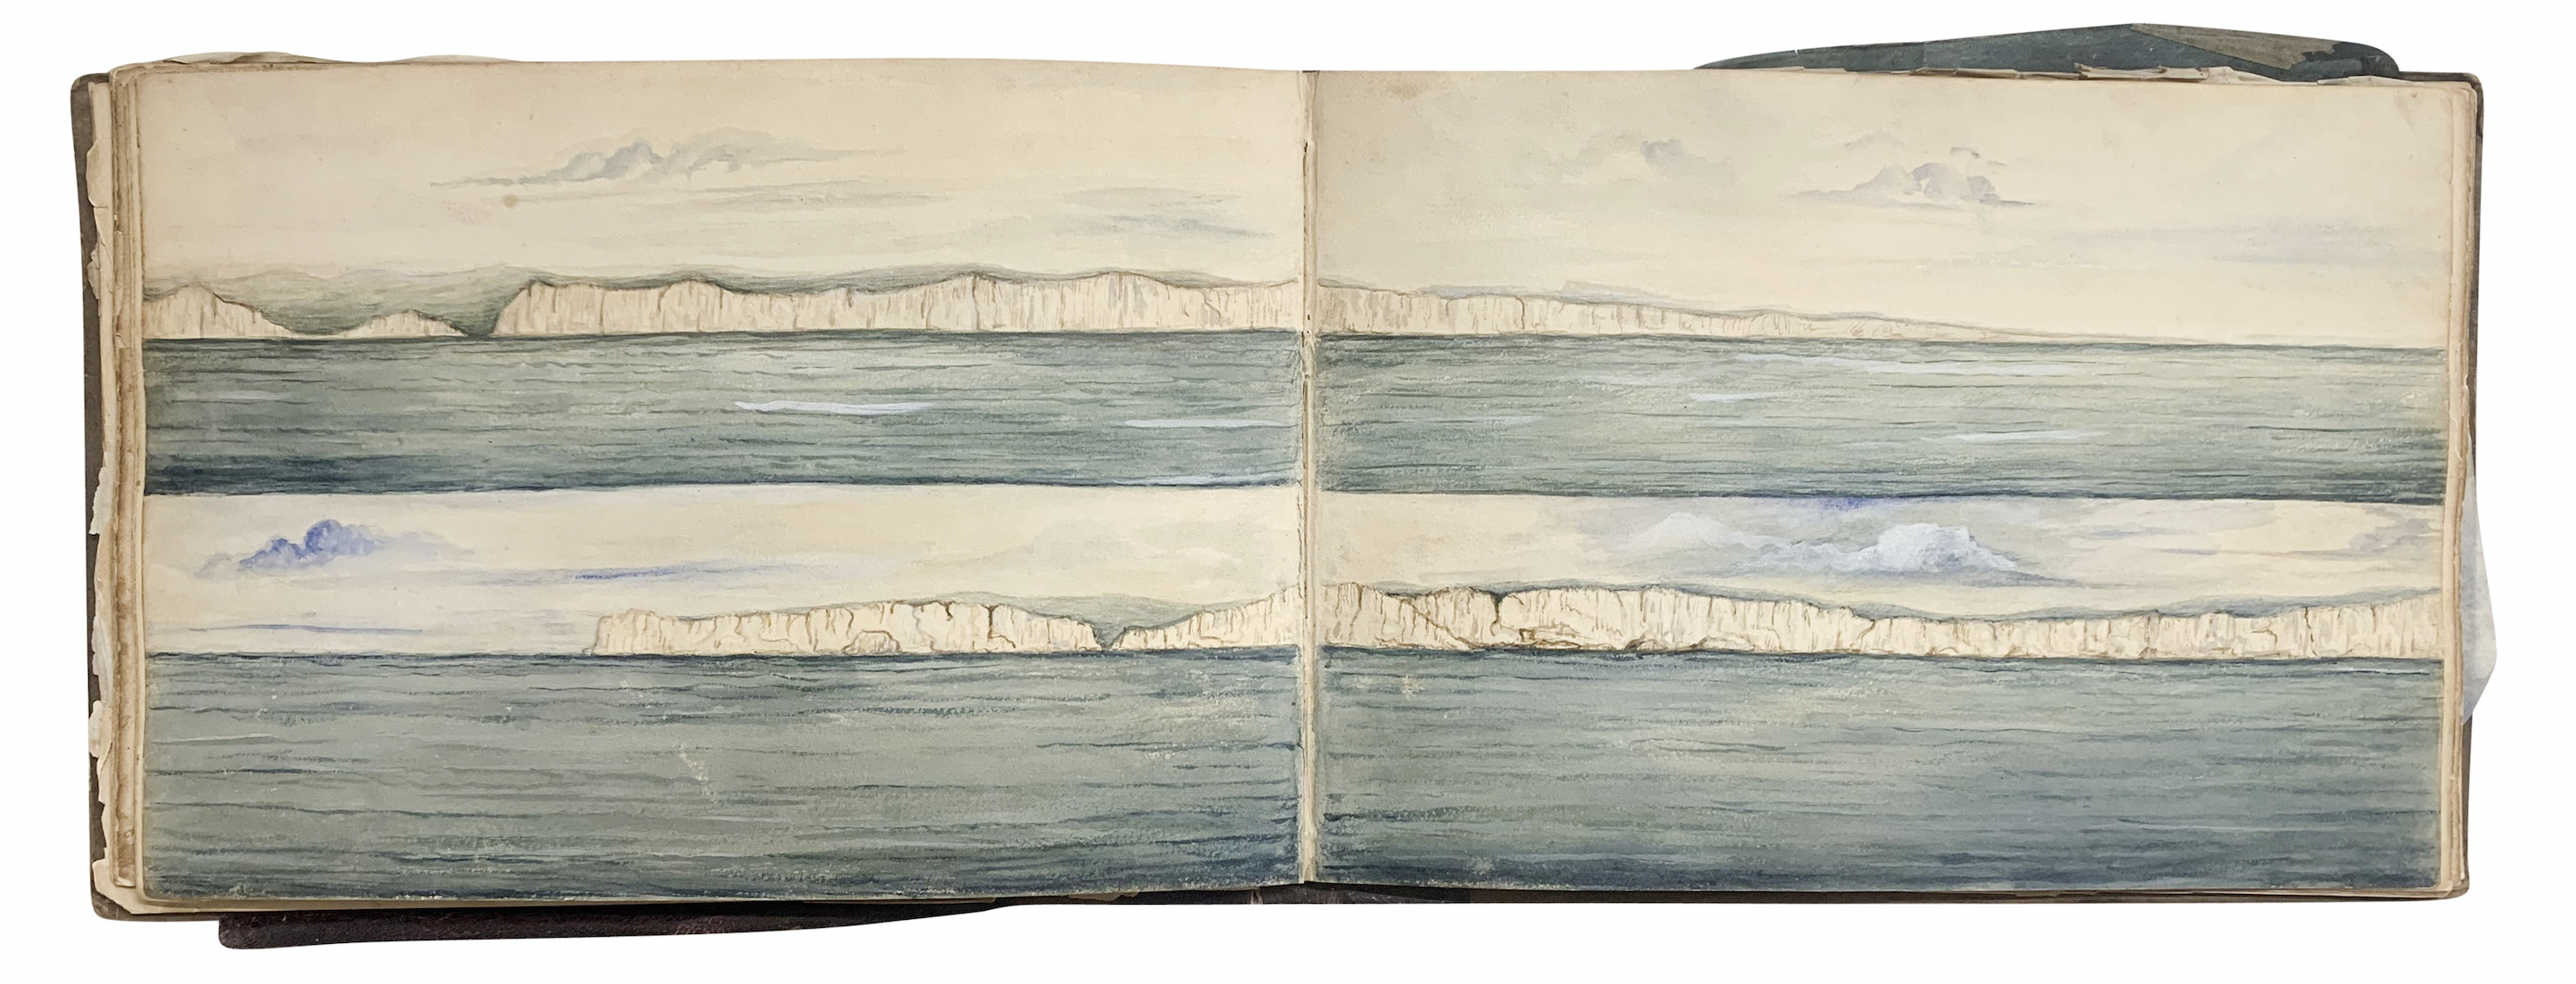  Colored drawing from Joseph Goldsborough Bruff’s sketchbook dating to his trip to California from 1849-1851, peak Gold Rush years, $25,000